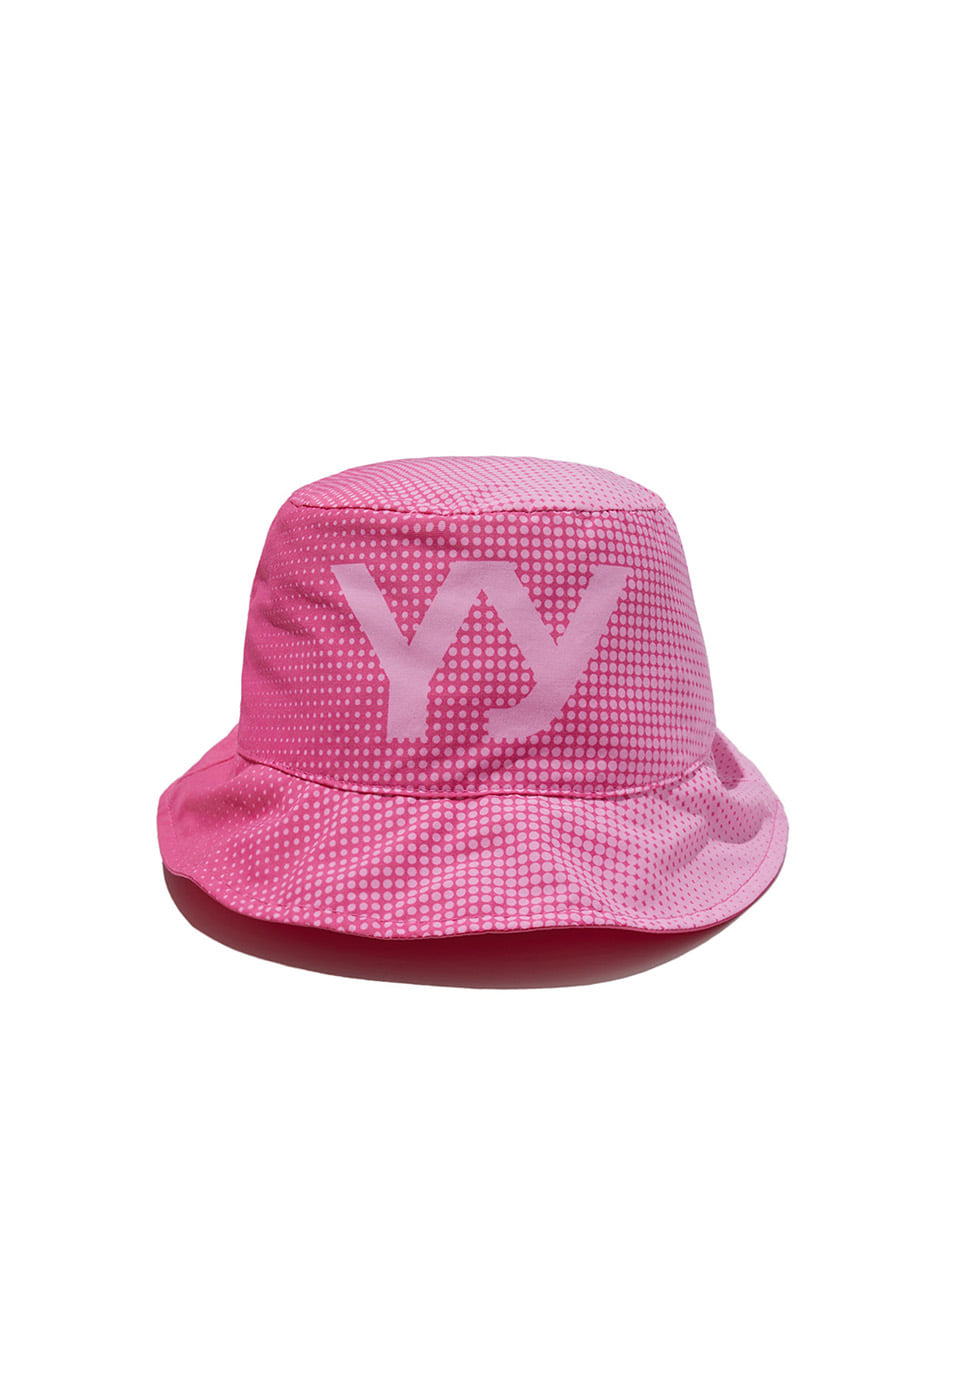 COLOR BUSAN_TWO-SIDED LOGO BUCKET HAT, PINK